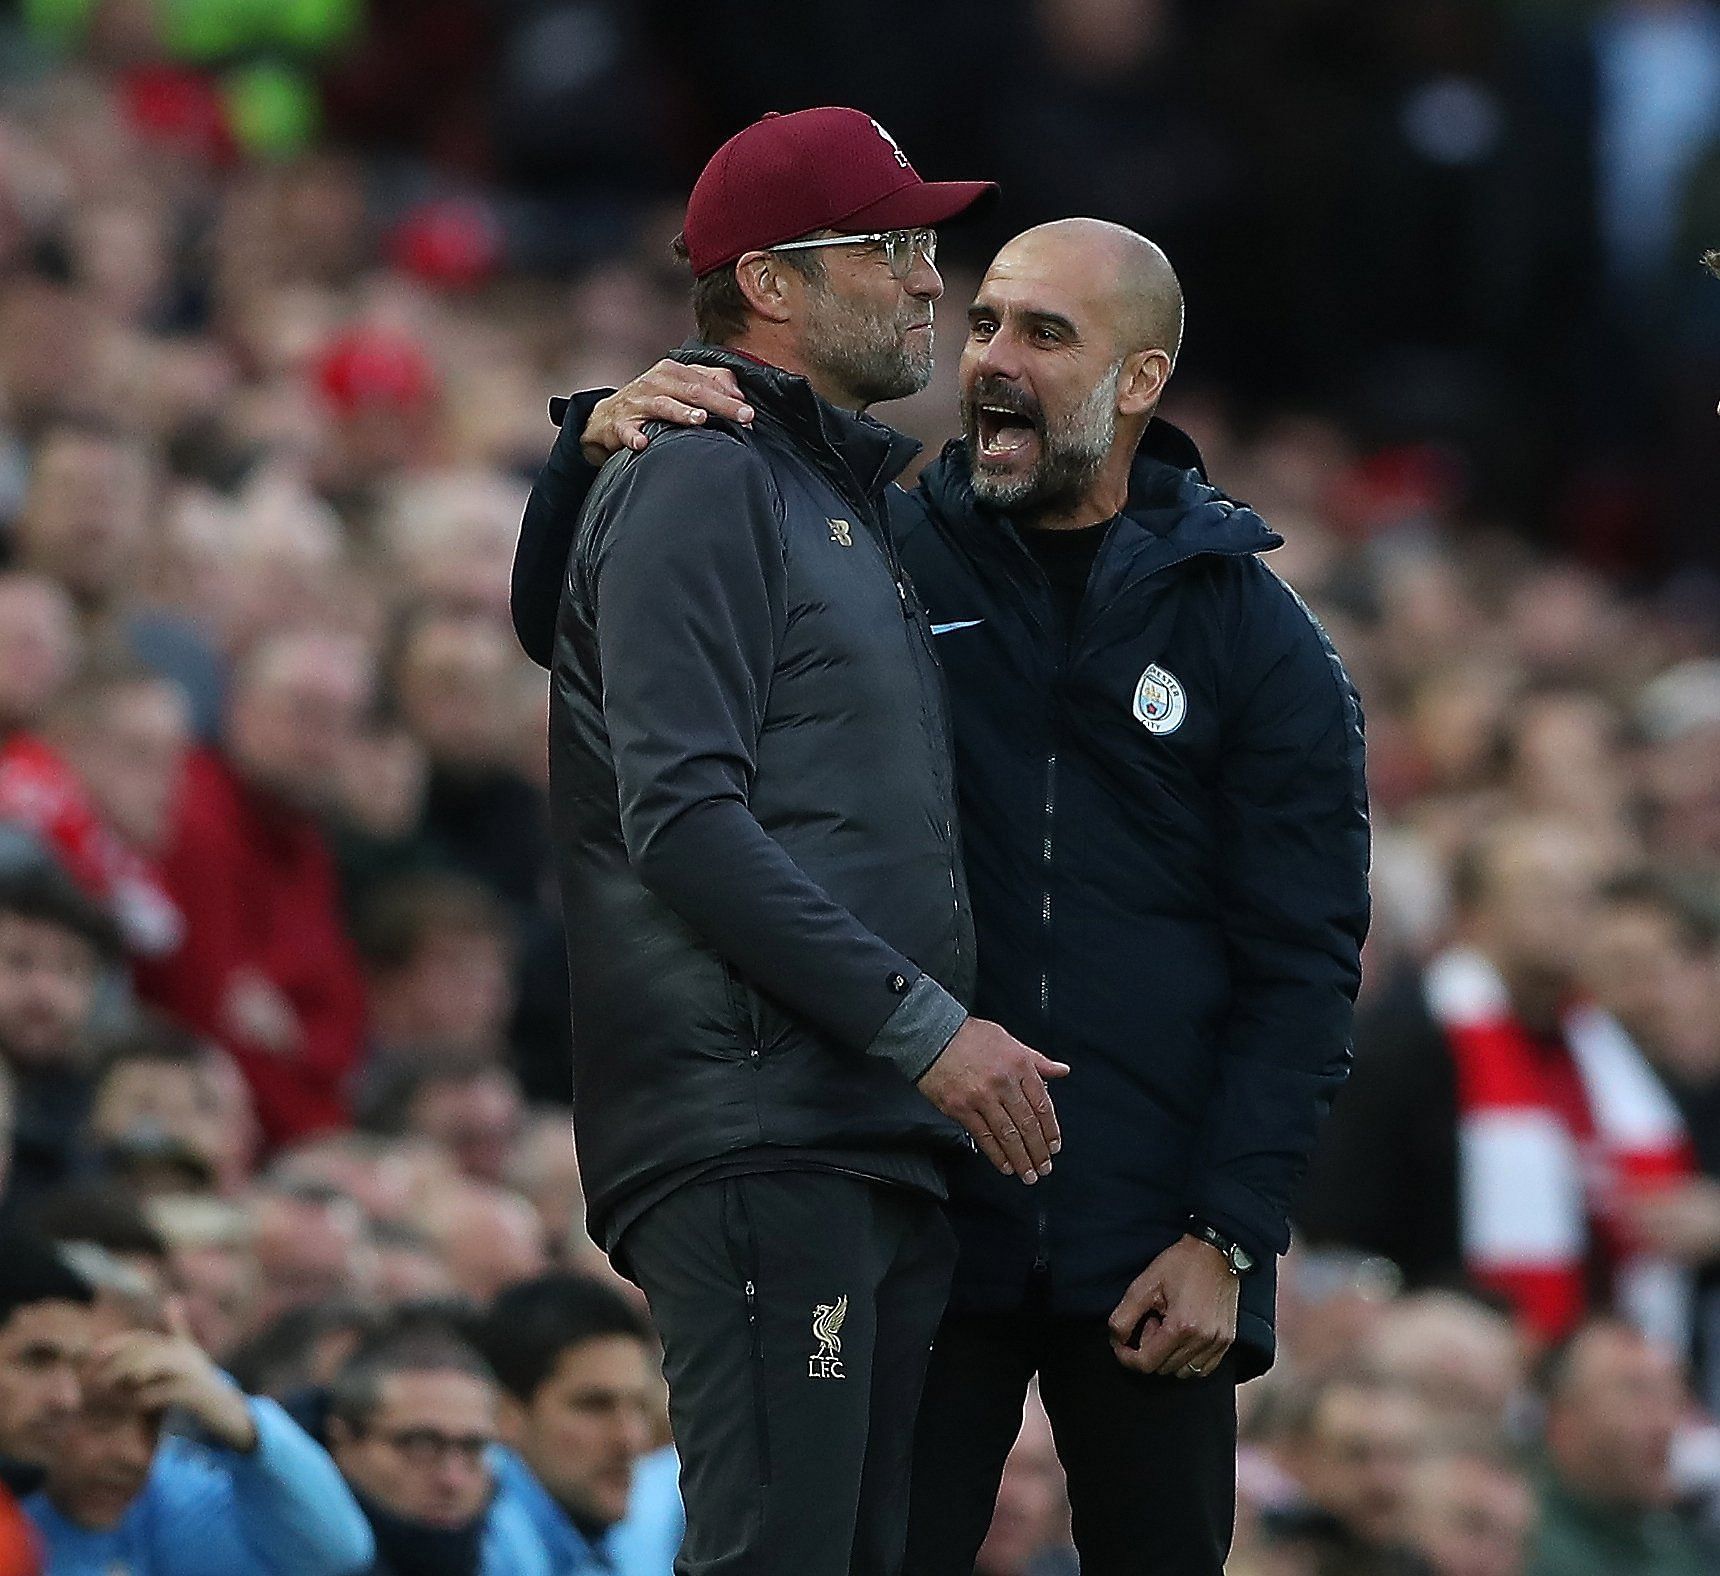 Jurgen Klopp and Pep Guardiola&#039;s Premier League battles have attracted a global audience to English football.